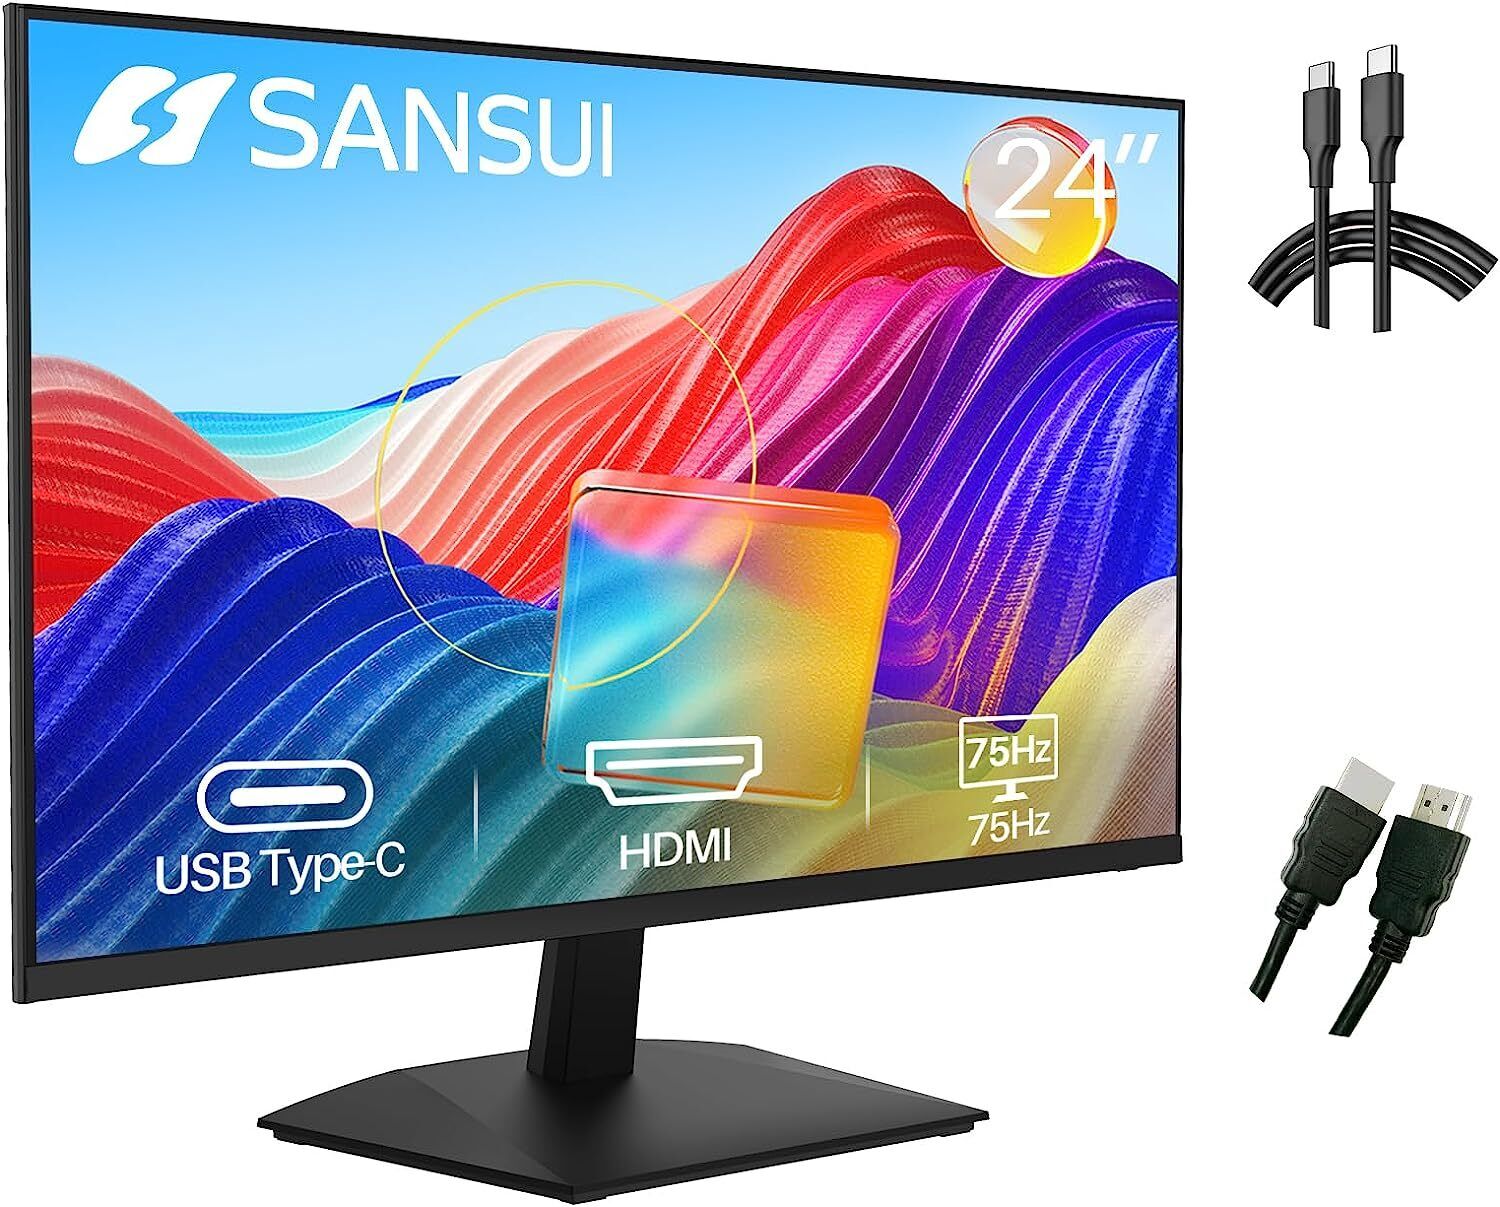 Sansui Computer Monitor 24'' FHD PC 1080P Monitor w/USB Type-C,Built-in Speakers